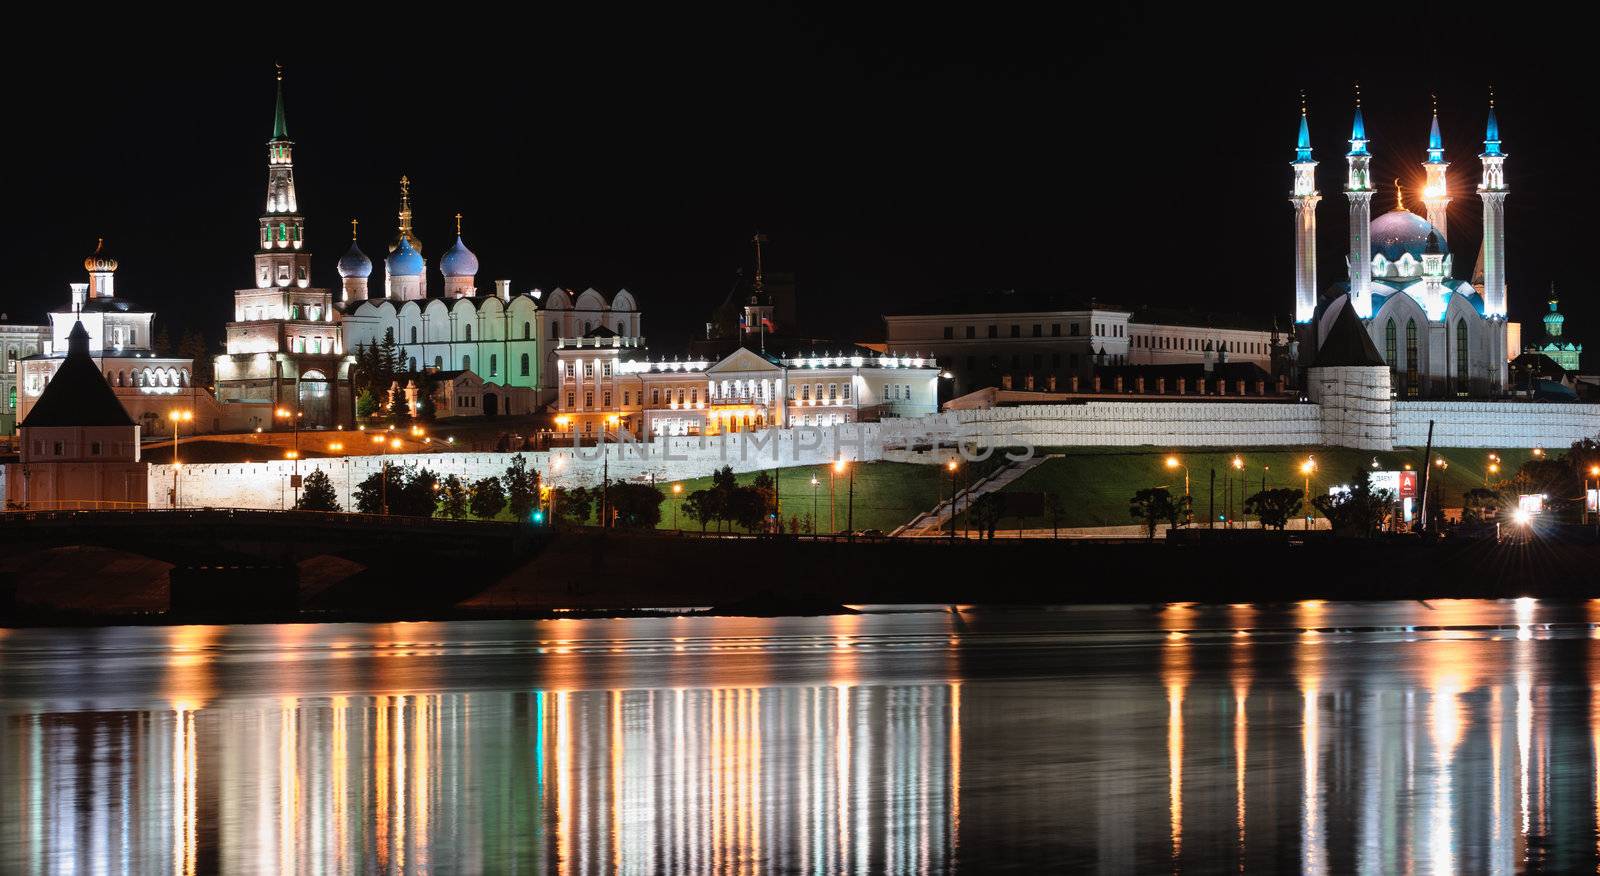 The magnificent Kremlin of Kazan (a Unesco World Heritage) with its orthodox church and mosque, a symbol of coexistence among different religions.